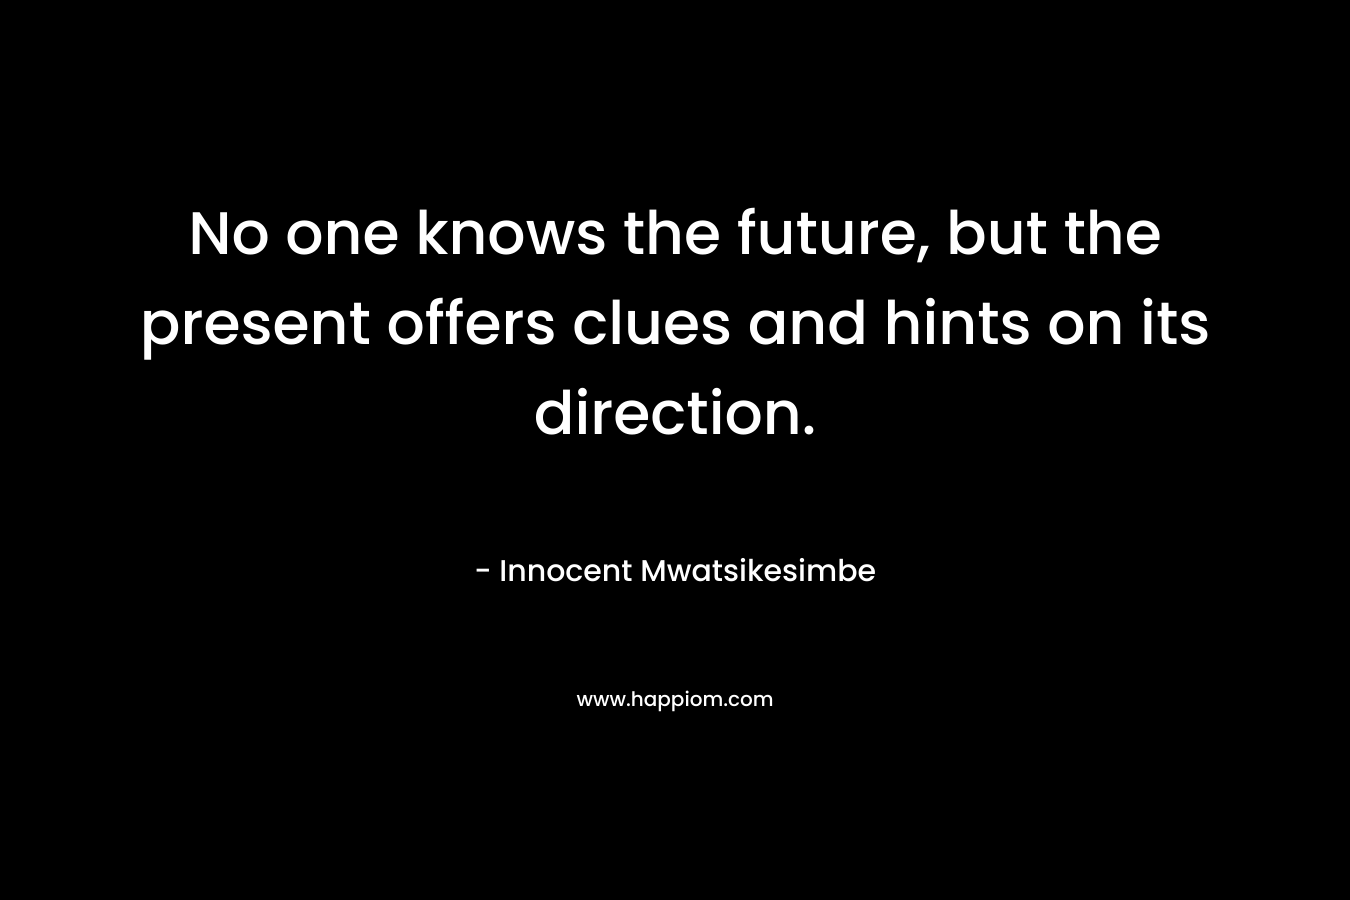 No one knows the future, but the present offers clues and hints on its direction. – Innocent Mwatsikesimbe